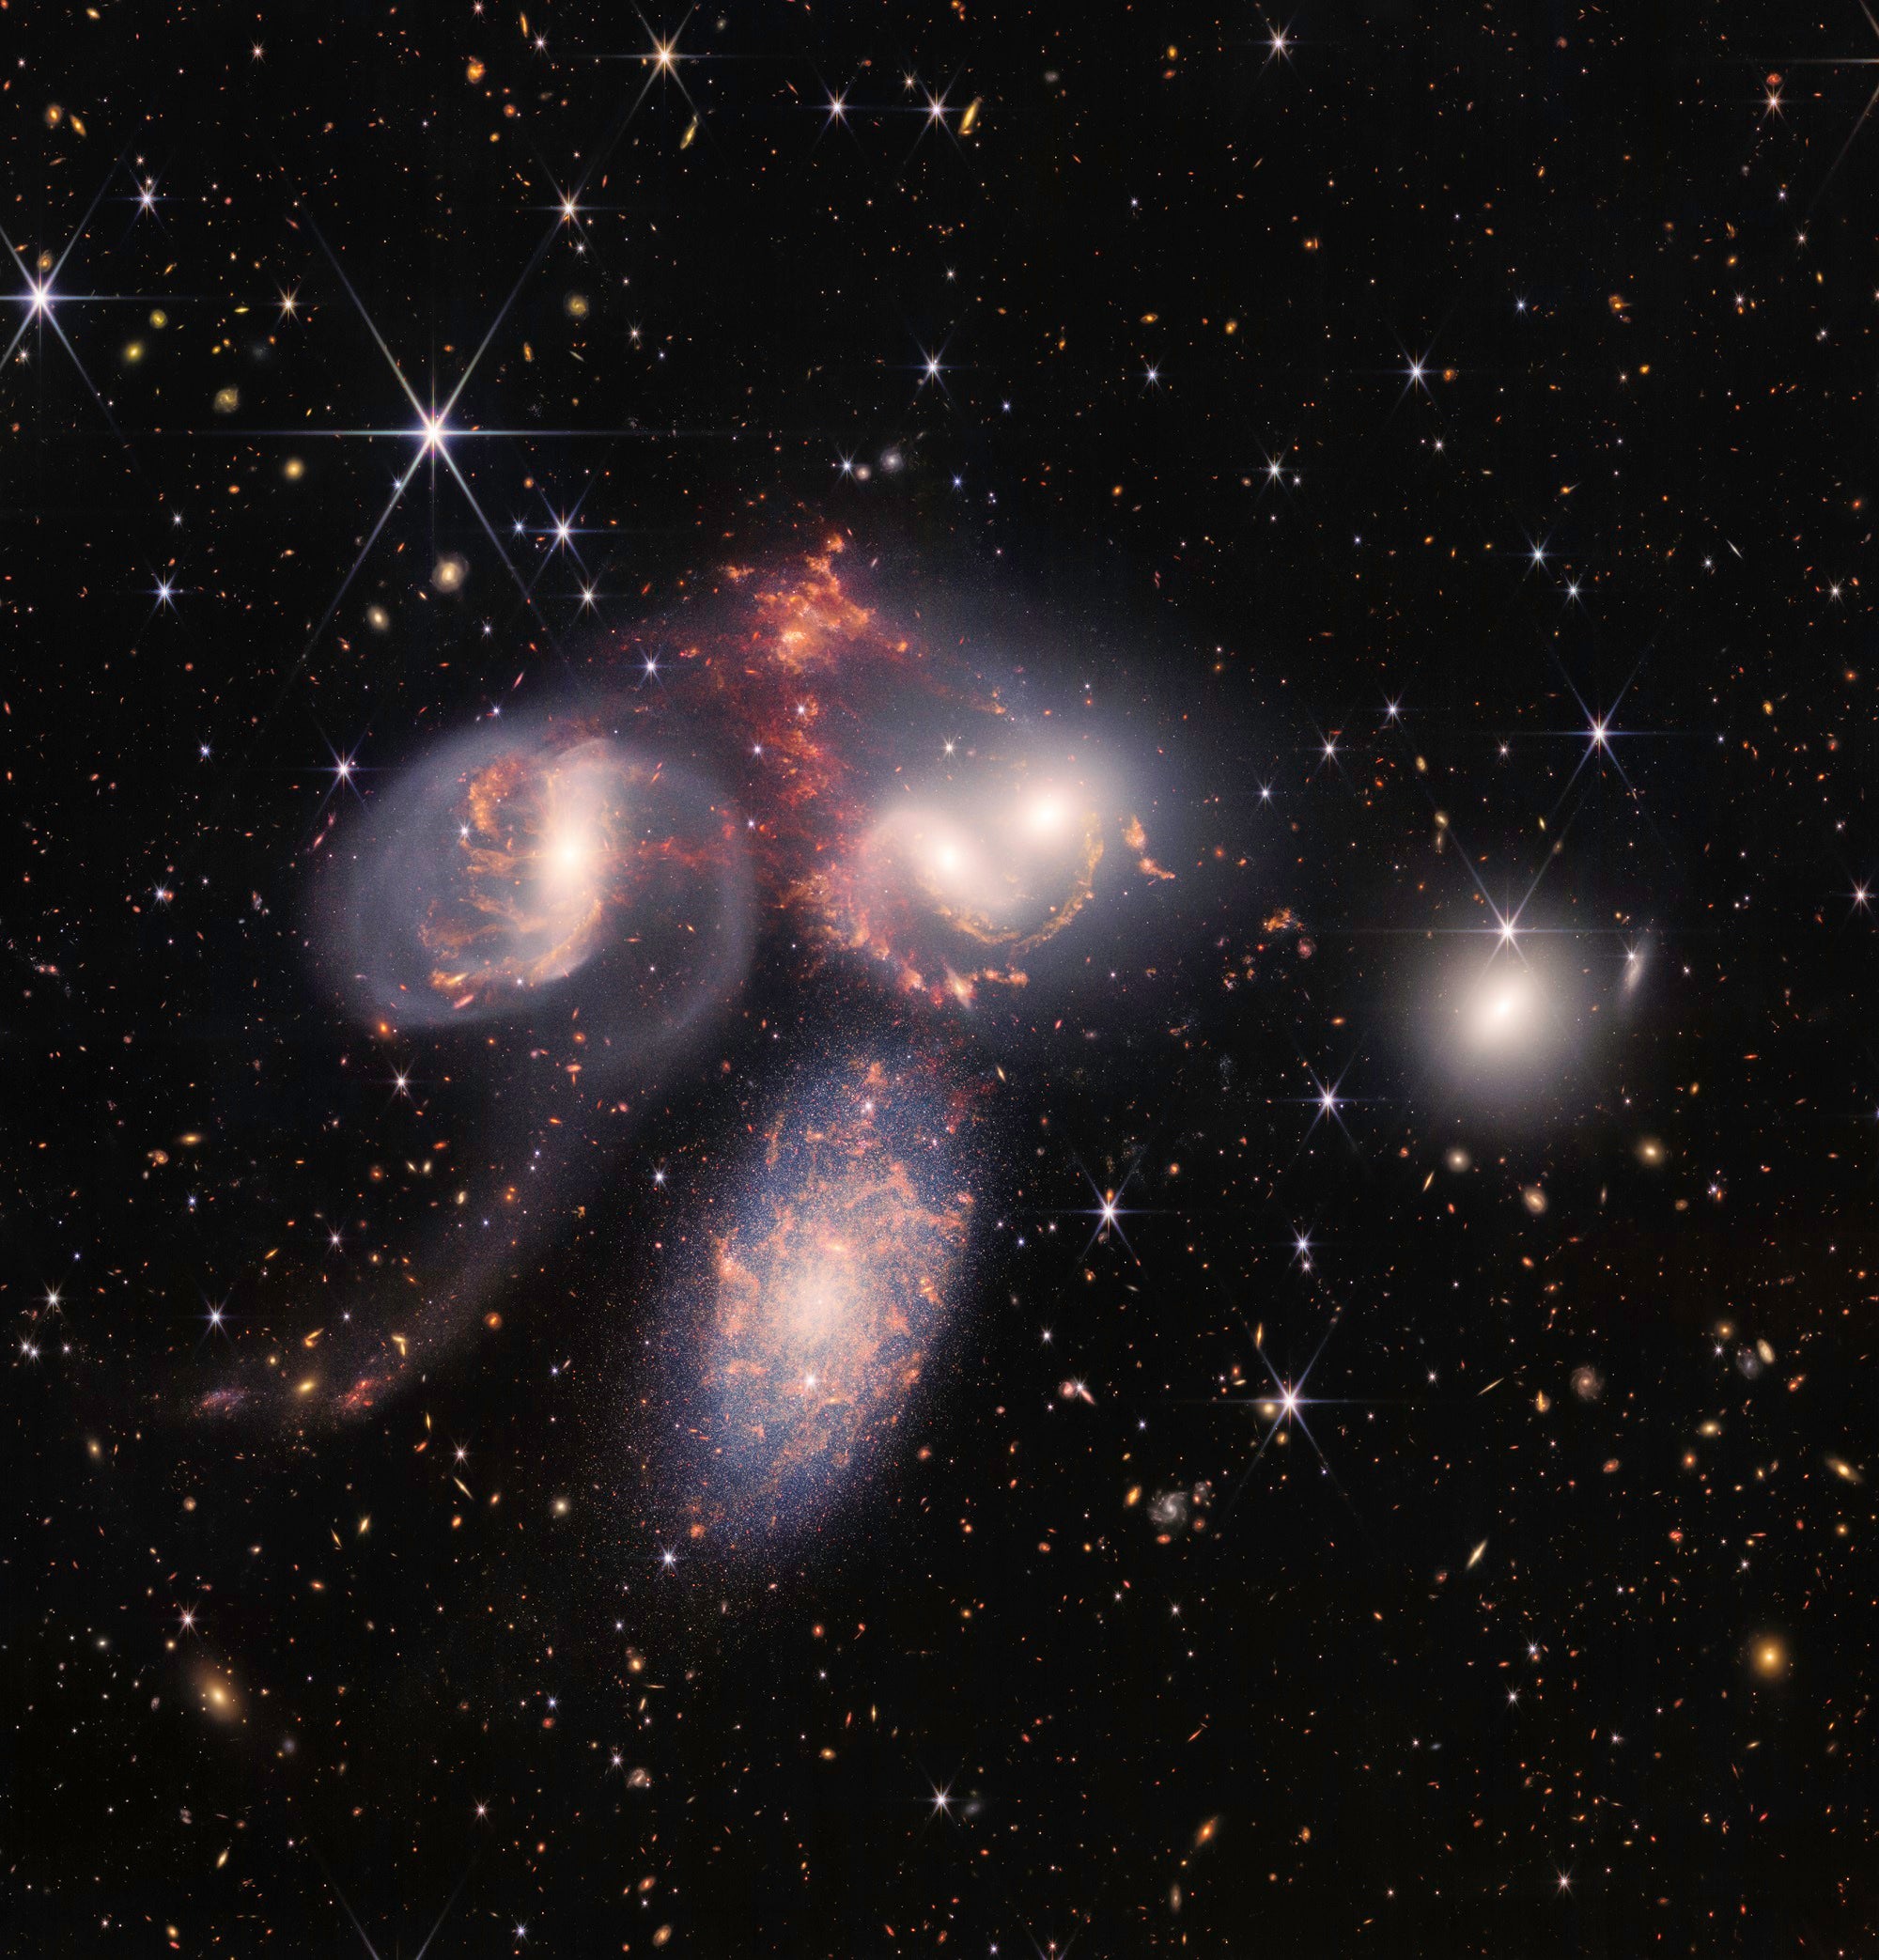 Five distance galaxies forming a tight group in Stephan's Quintet in a James Webb Space Telescope image